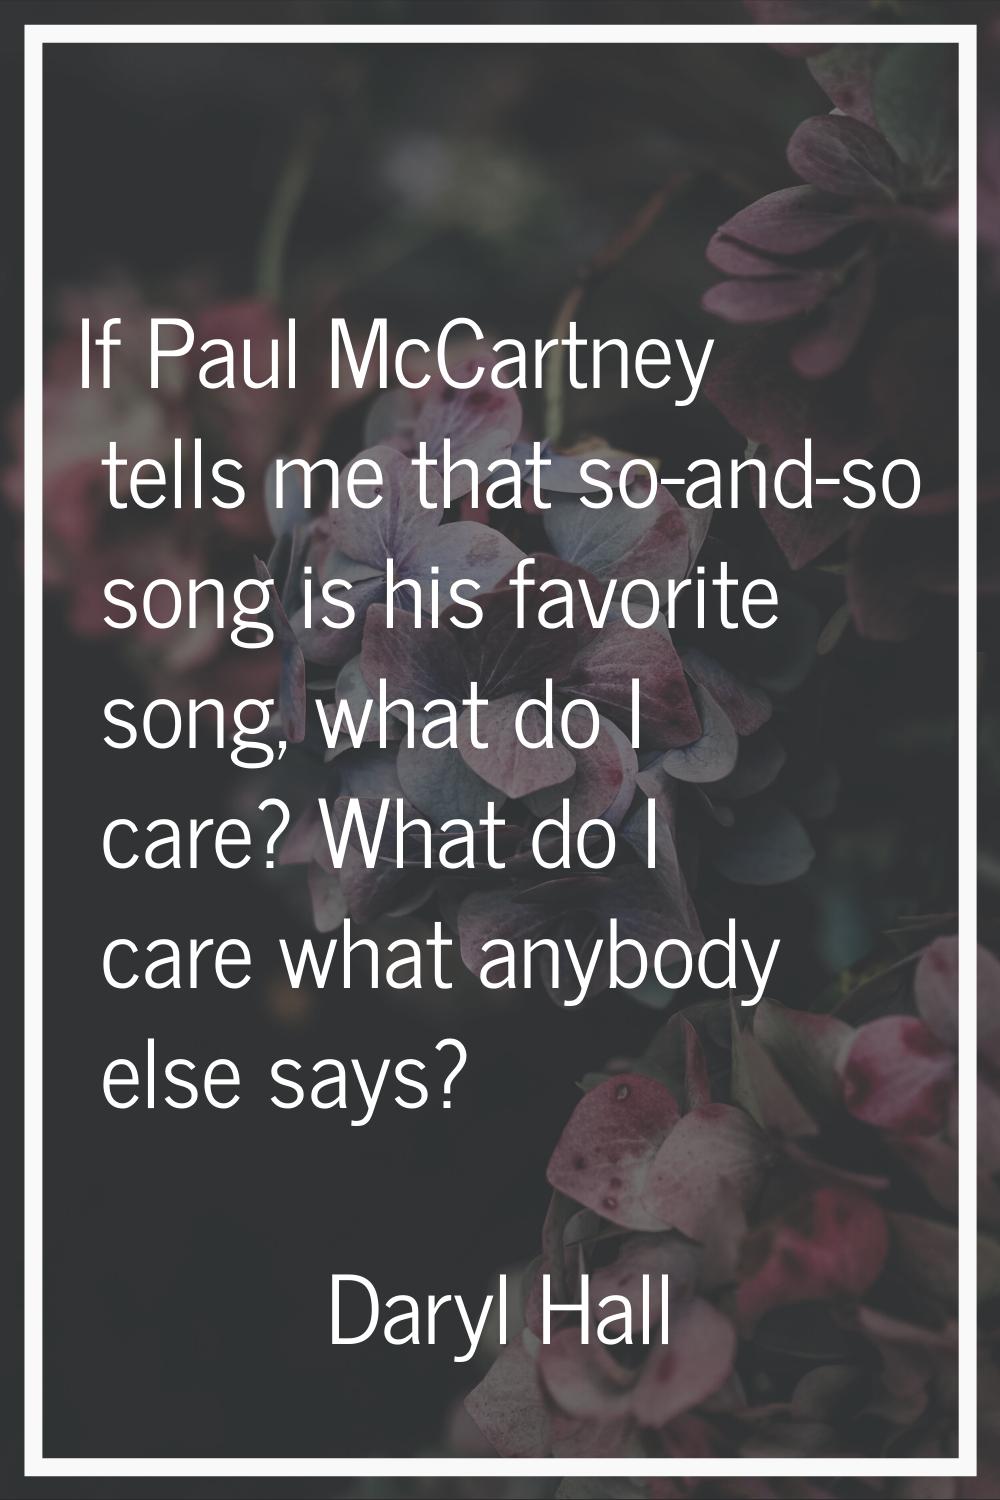 If Paul McCartney tells me that so-and-so song is his favorite song, what do I care? What do I care